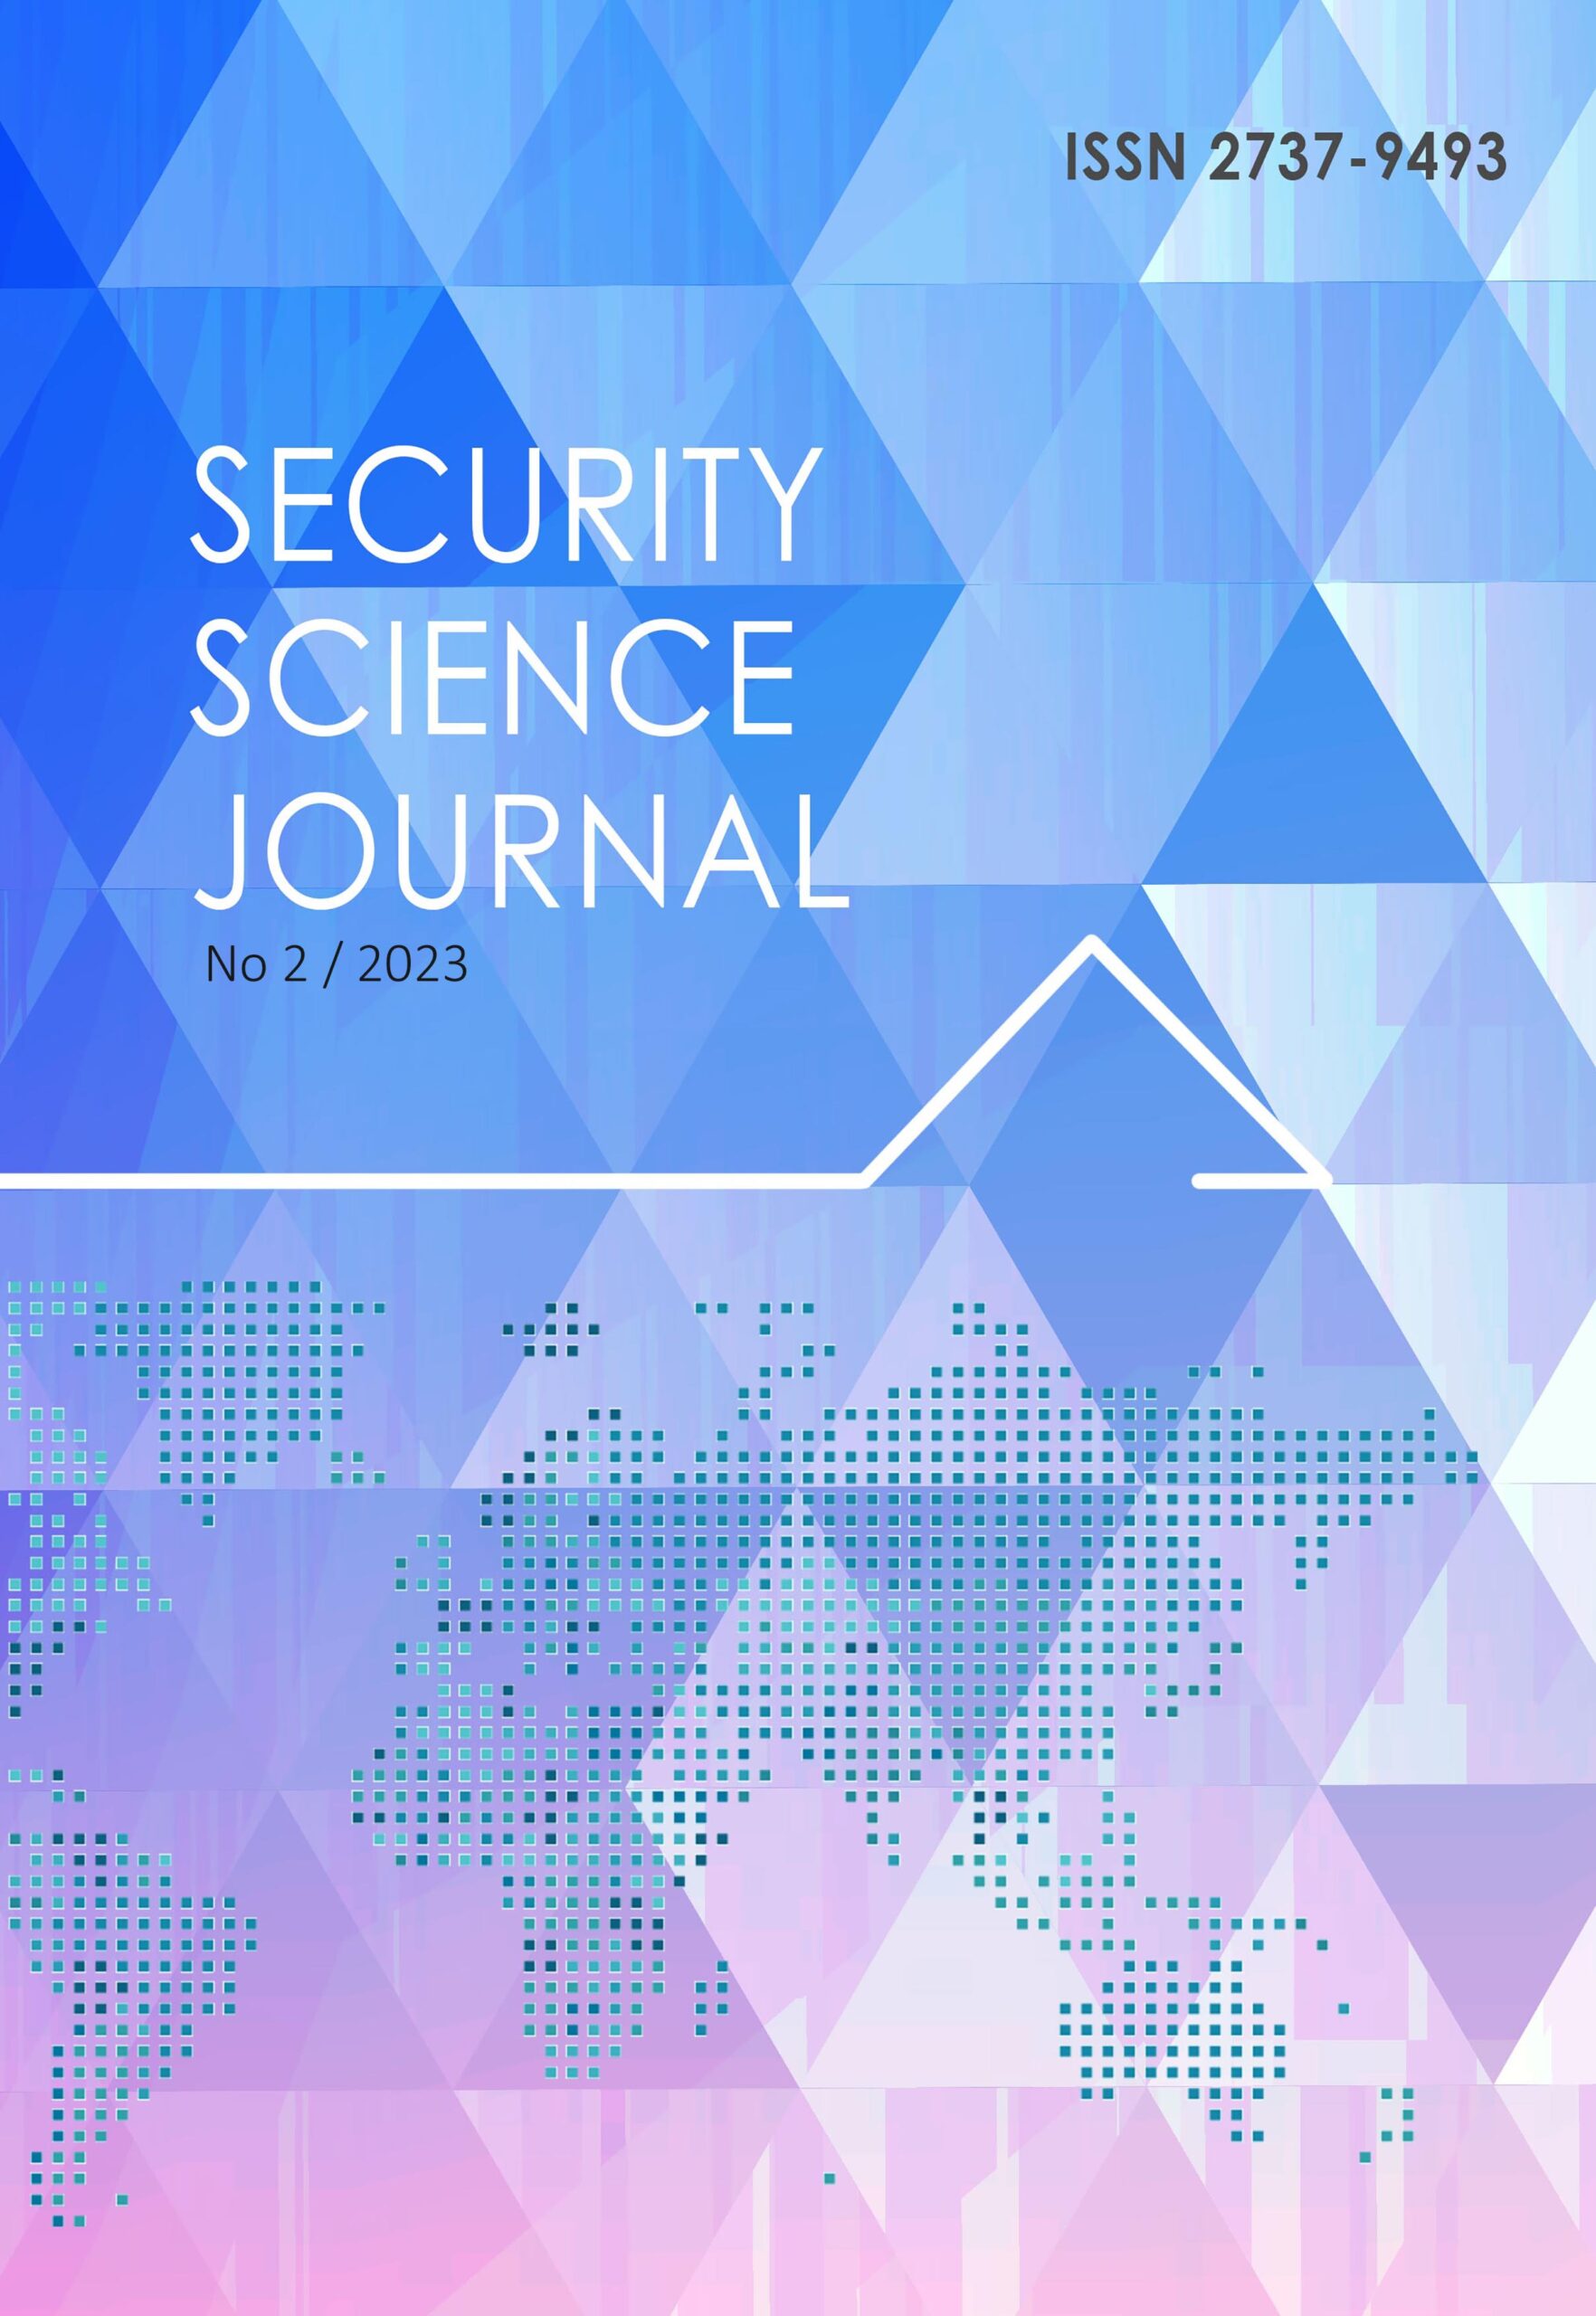 Security Science Journal is ready for you – Vol. 4 No. 2 (2023)